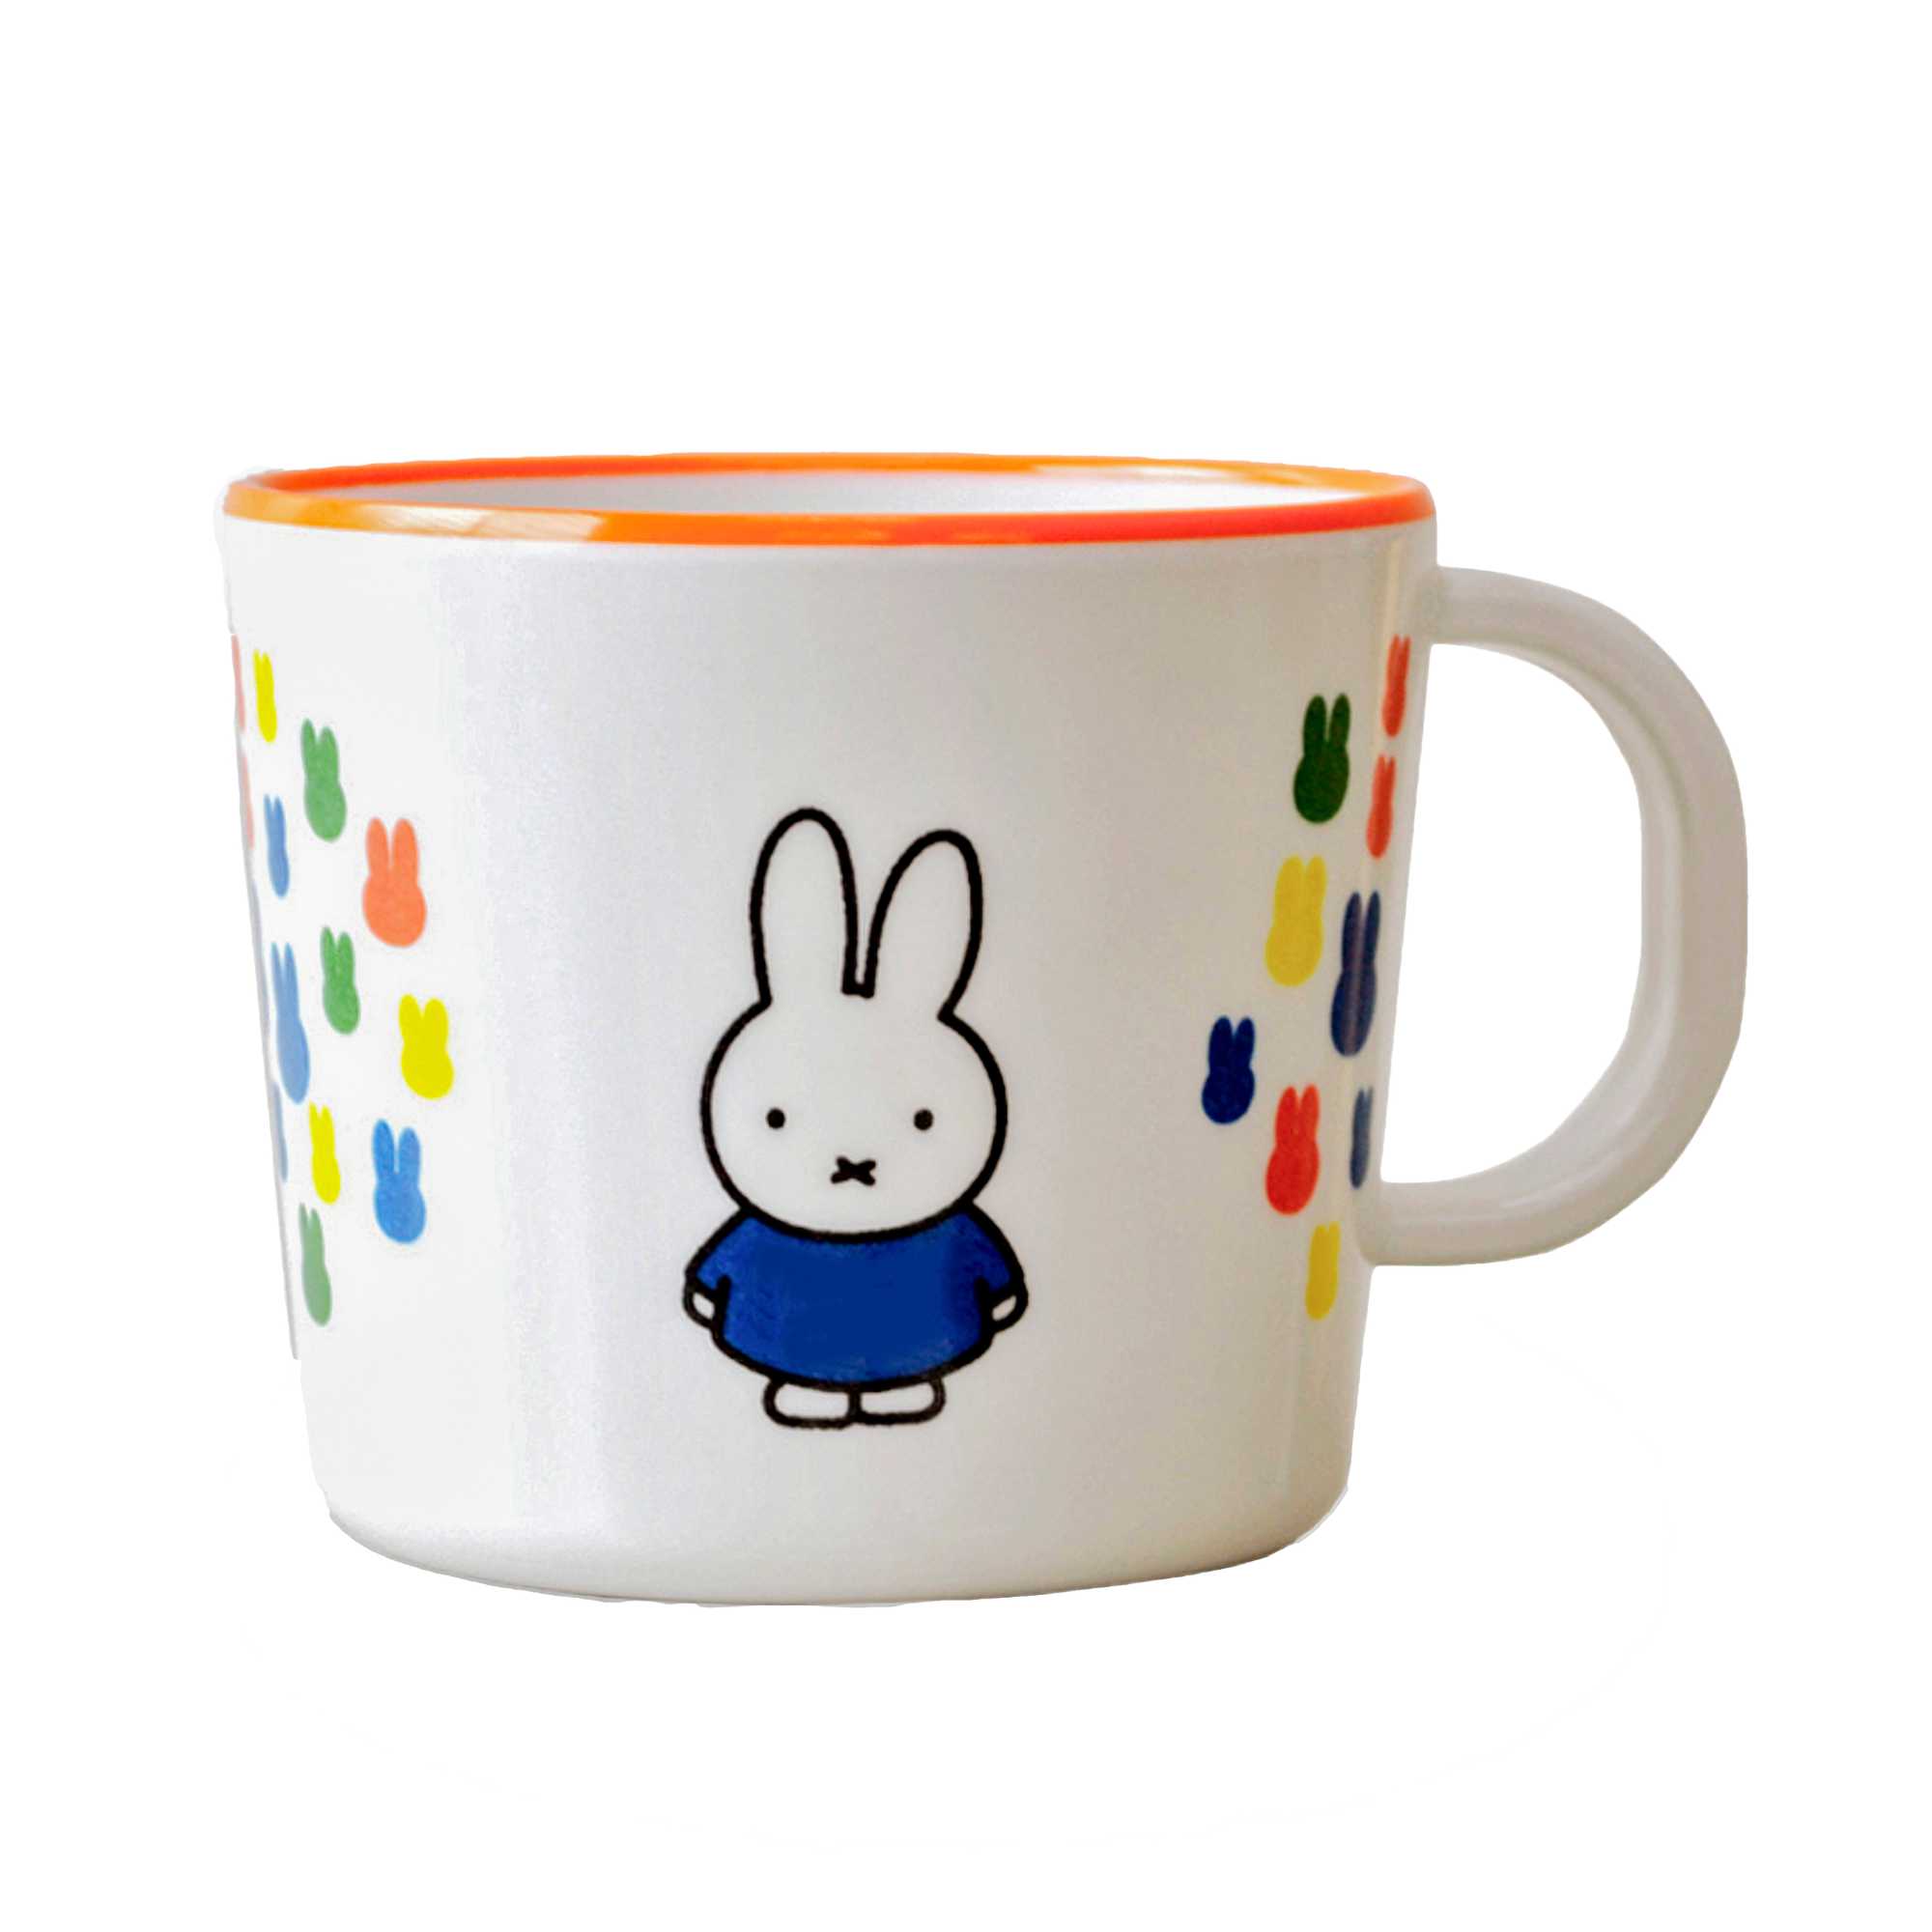 Miffy Melamine Cup with pattern, gallery